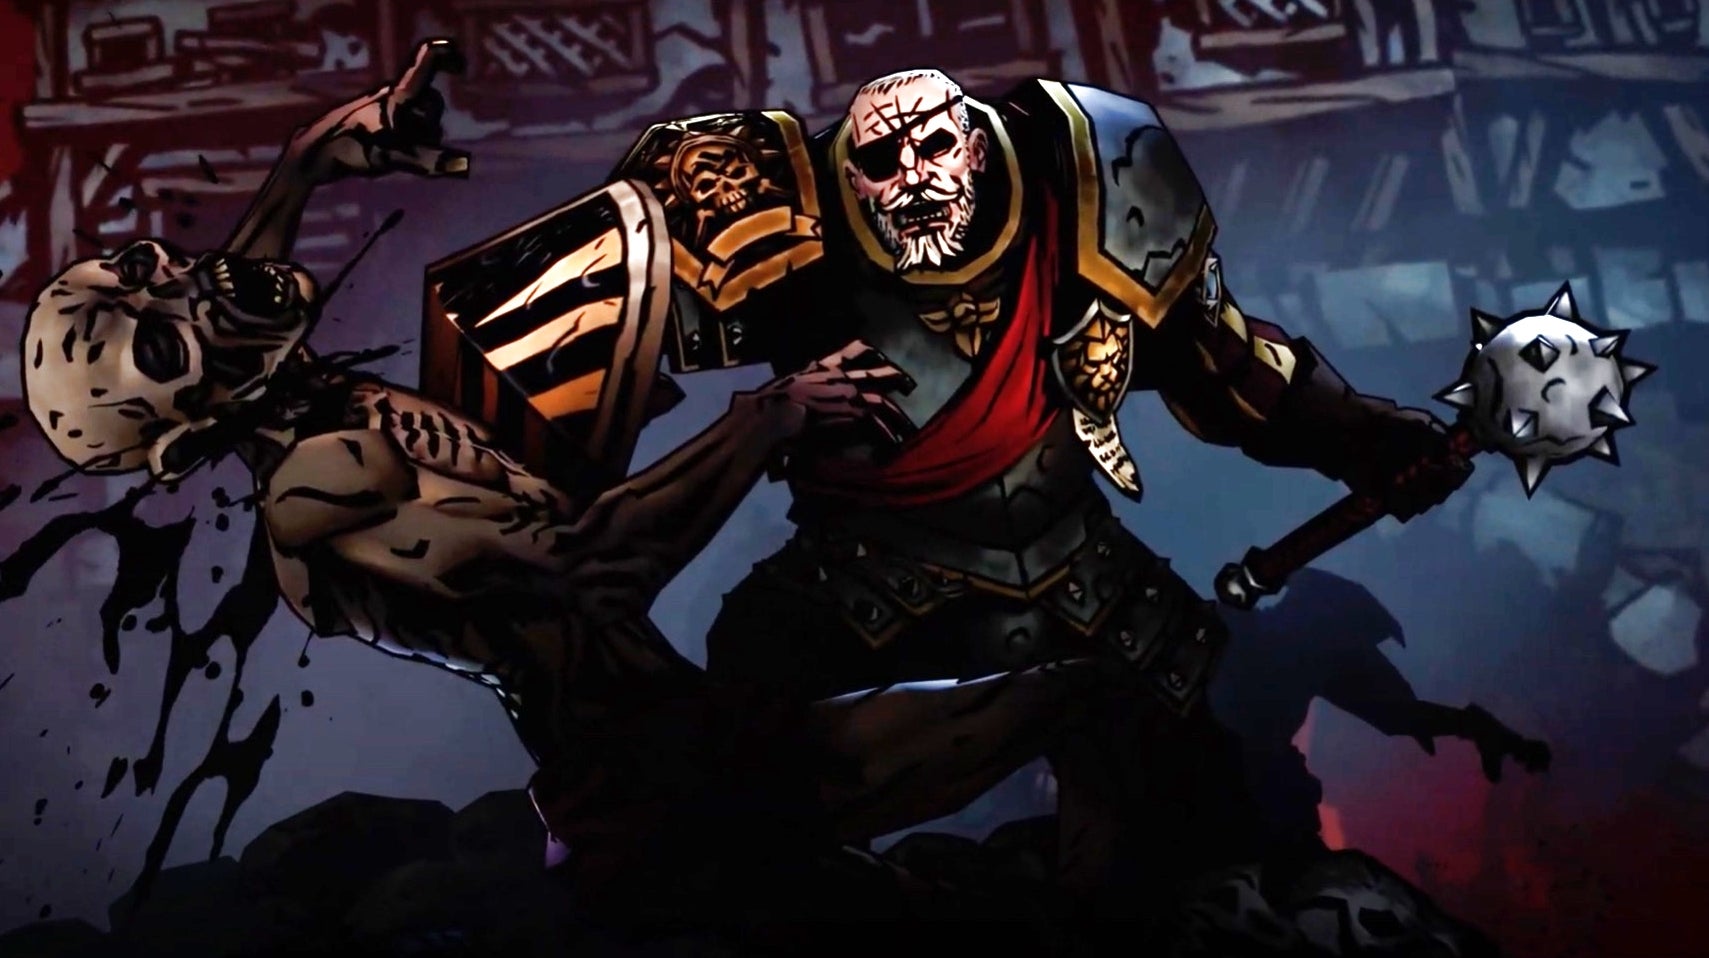 Image for Darkest Dungeon 2 set for full release in February 2023